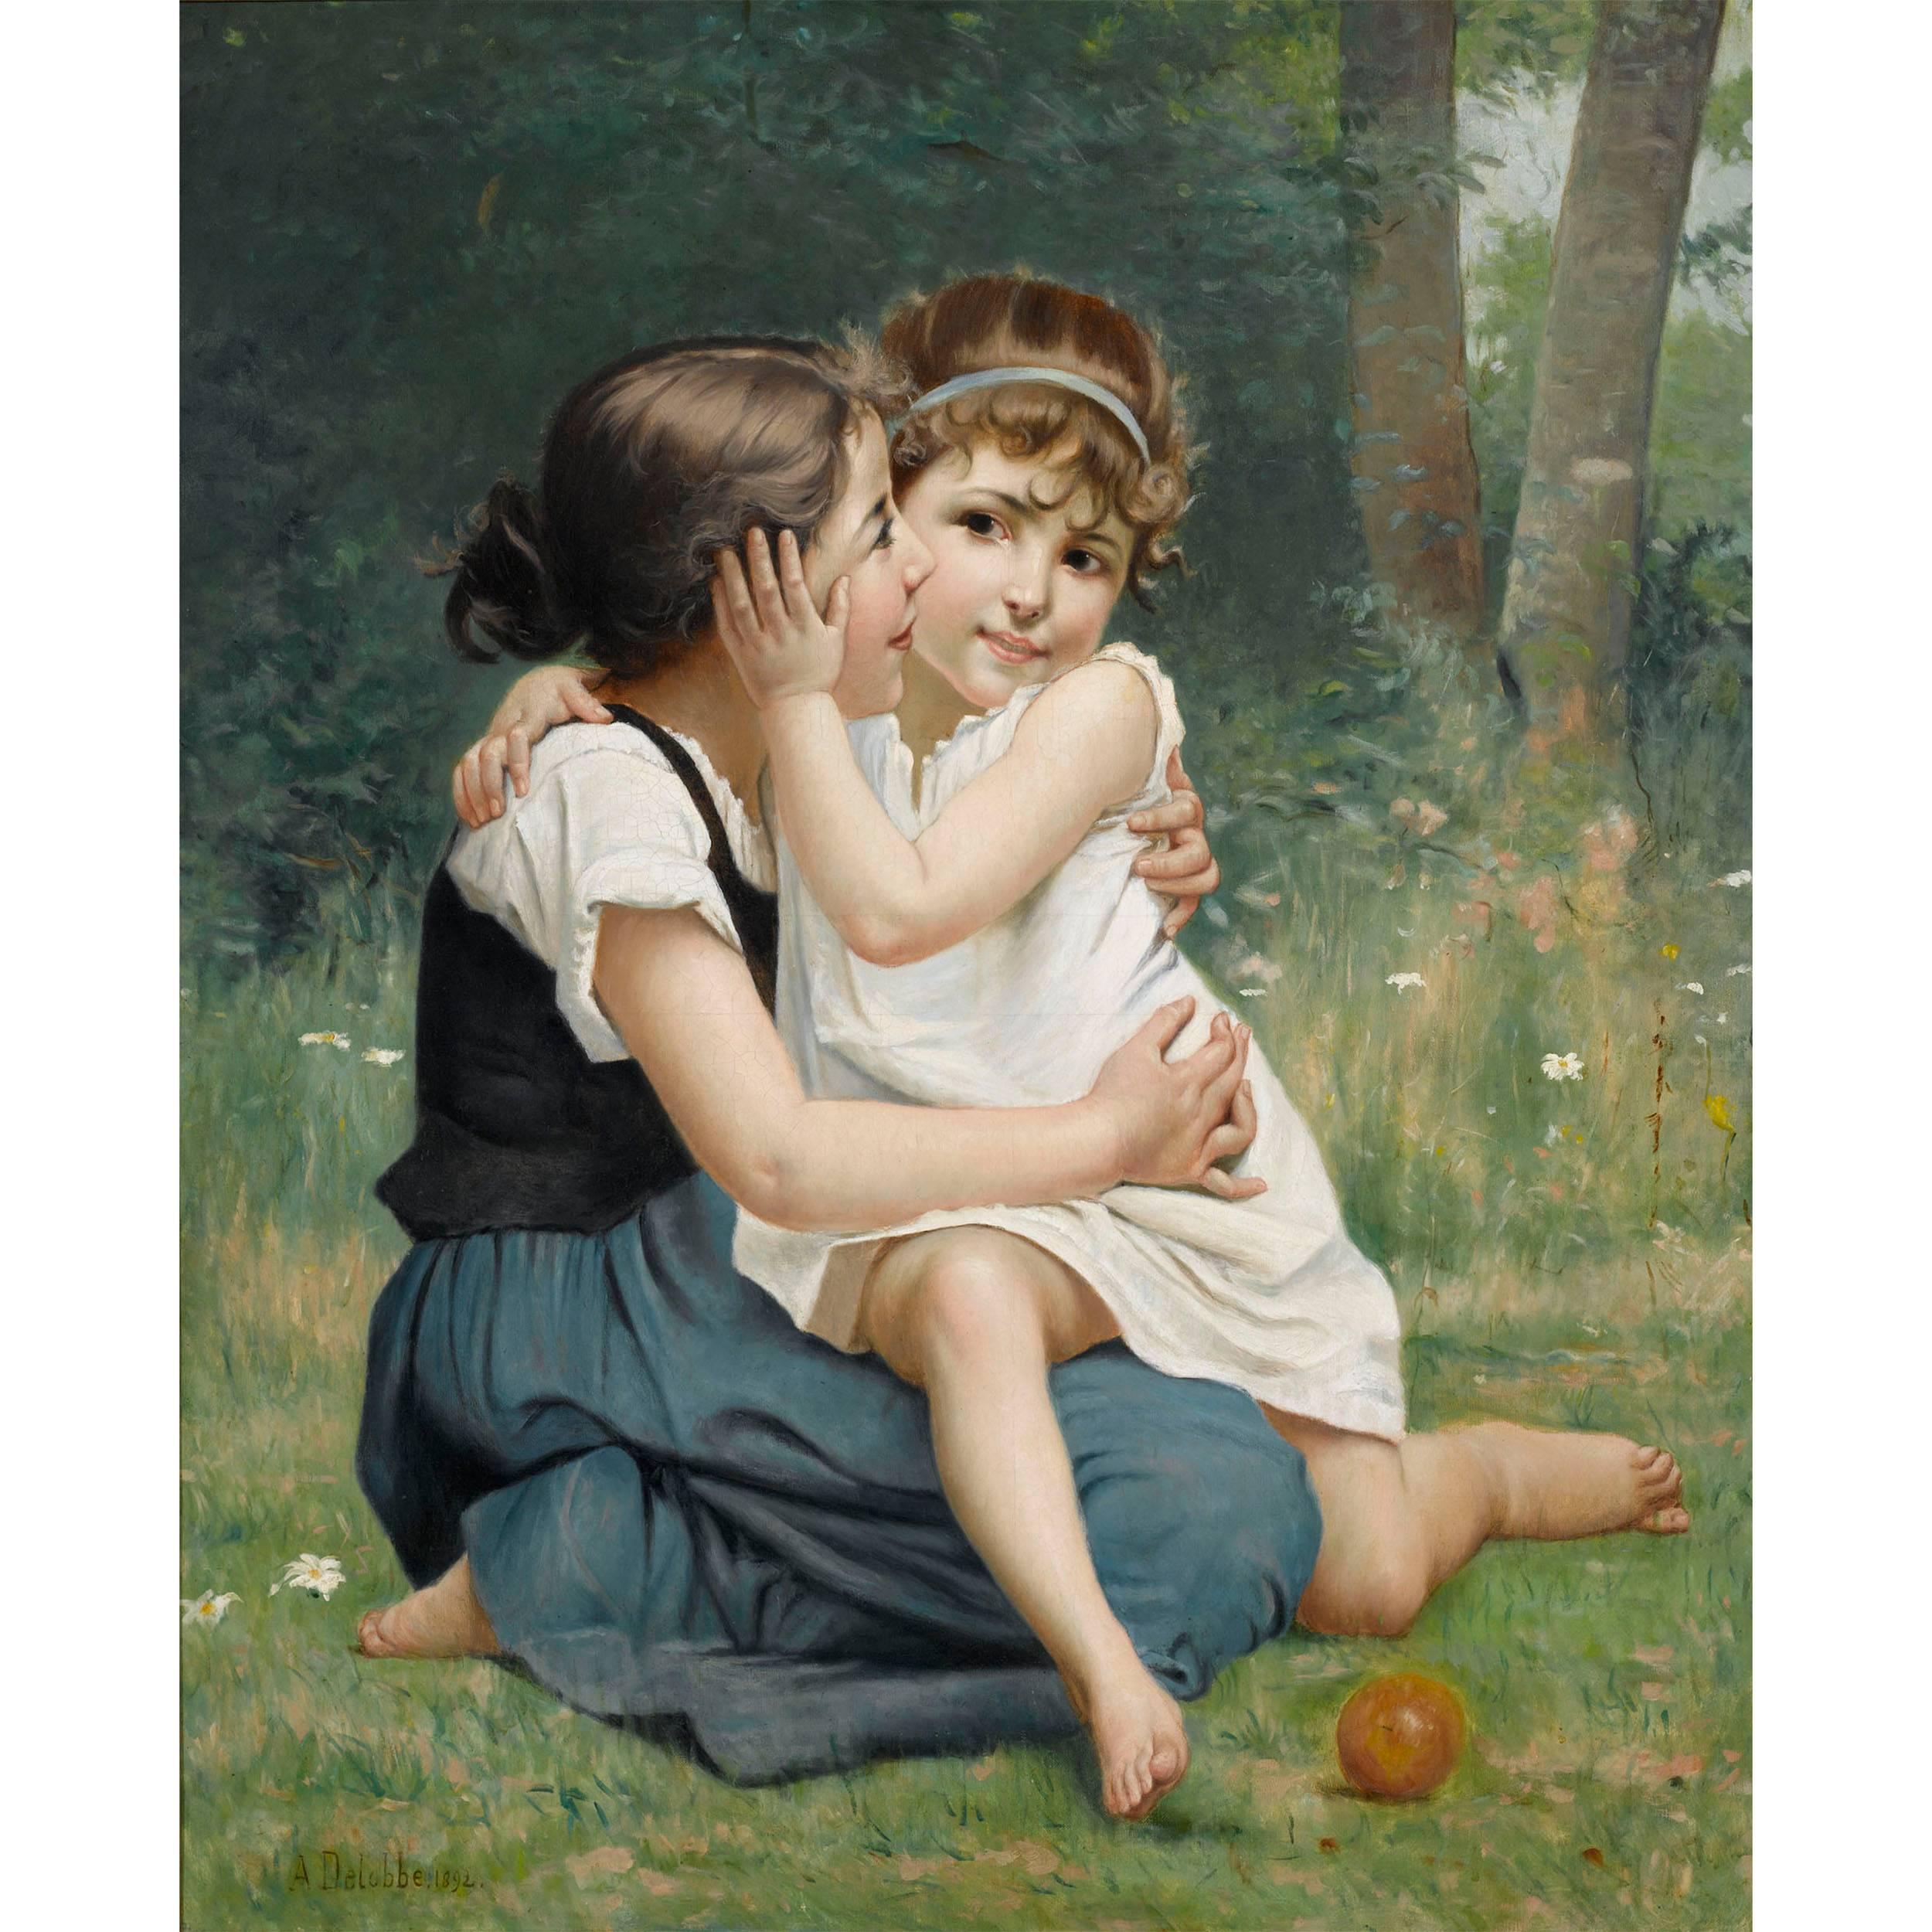 Sisterly Love by Francois Alfred Delobbe